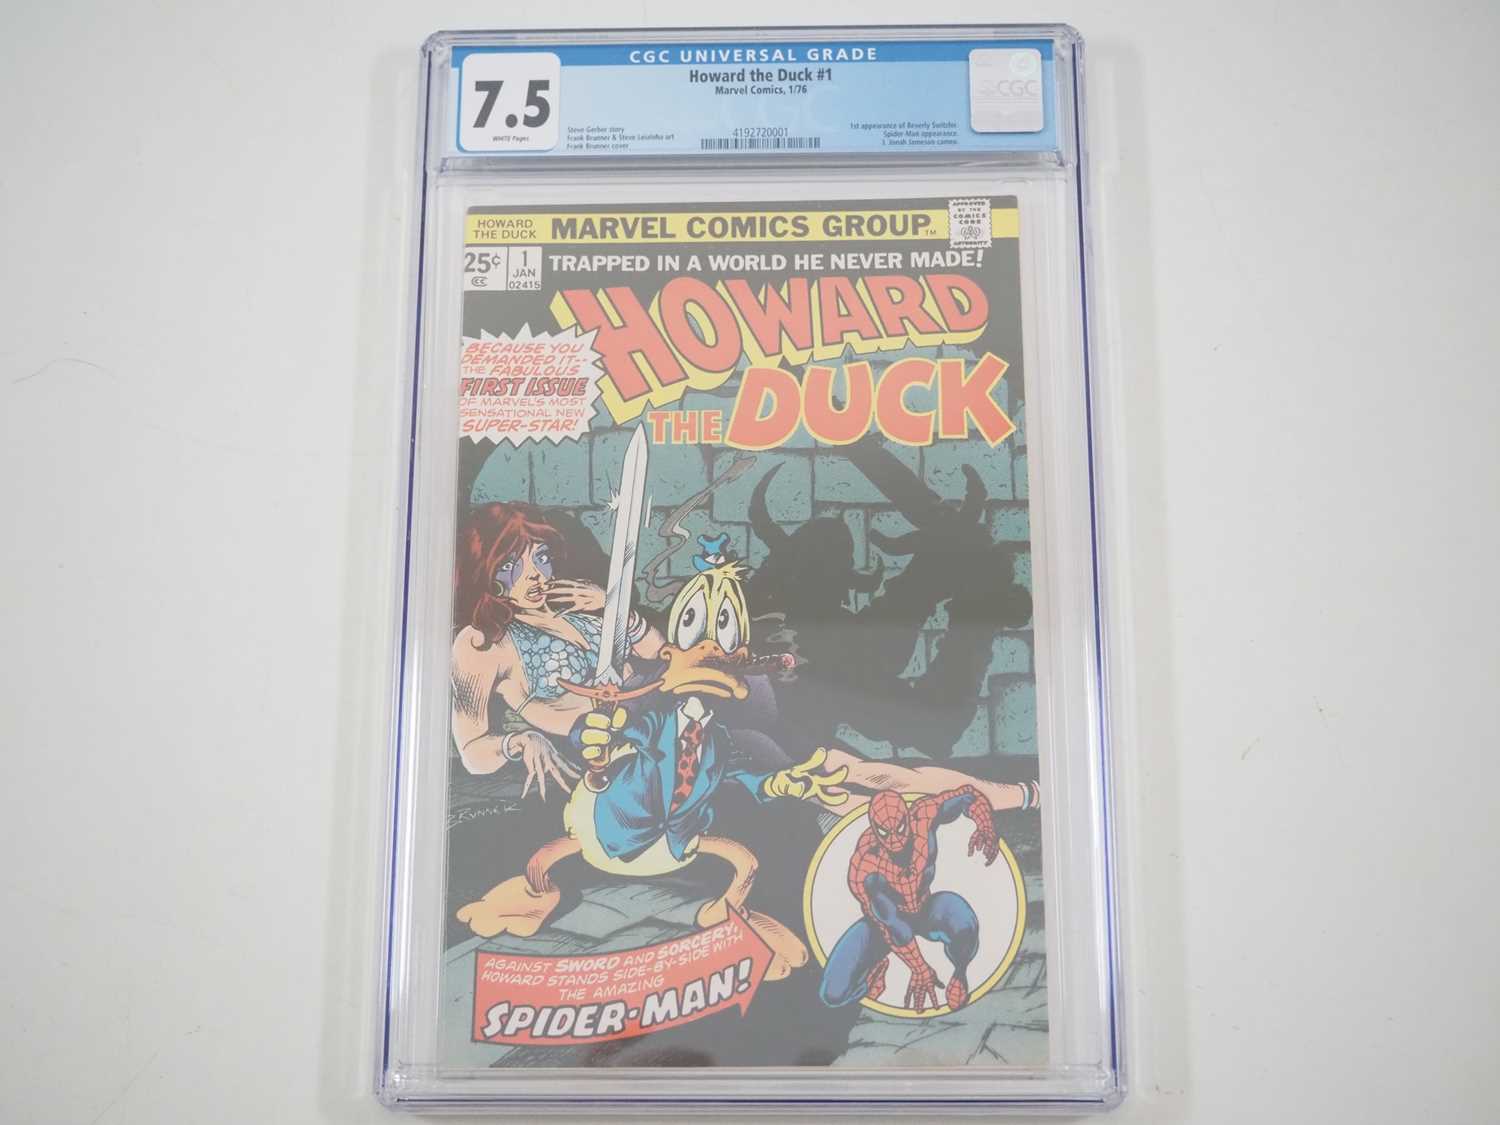 HOWARD THE DUCK #1 (1976 - MARVEL) - GRADED 7.5 (VF-) by CGC - First solo title featuring Howard the